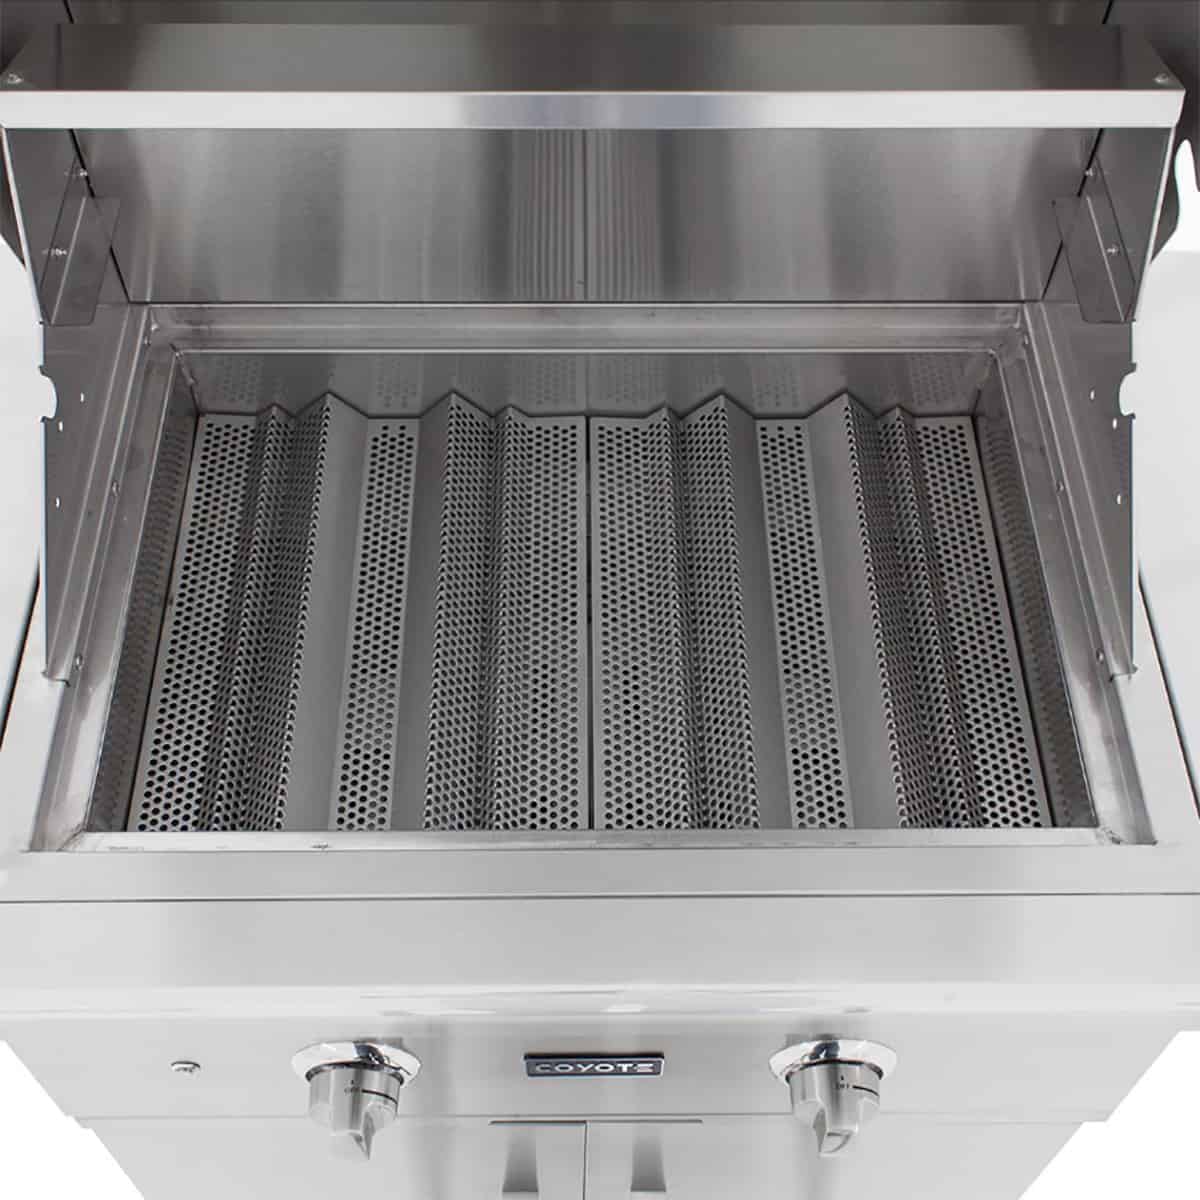 Coyote C-Series 28 Inch Freestanding 2-Burner Grill Heat Control Grid Top View Close-up